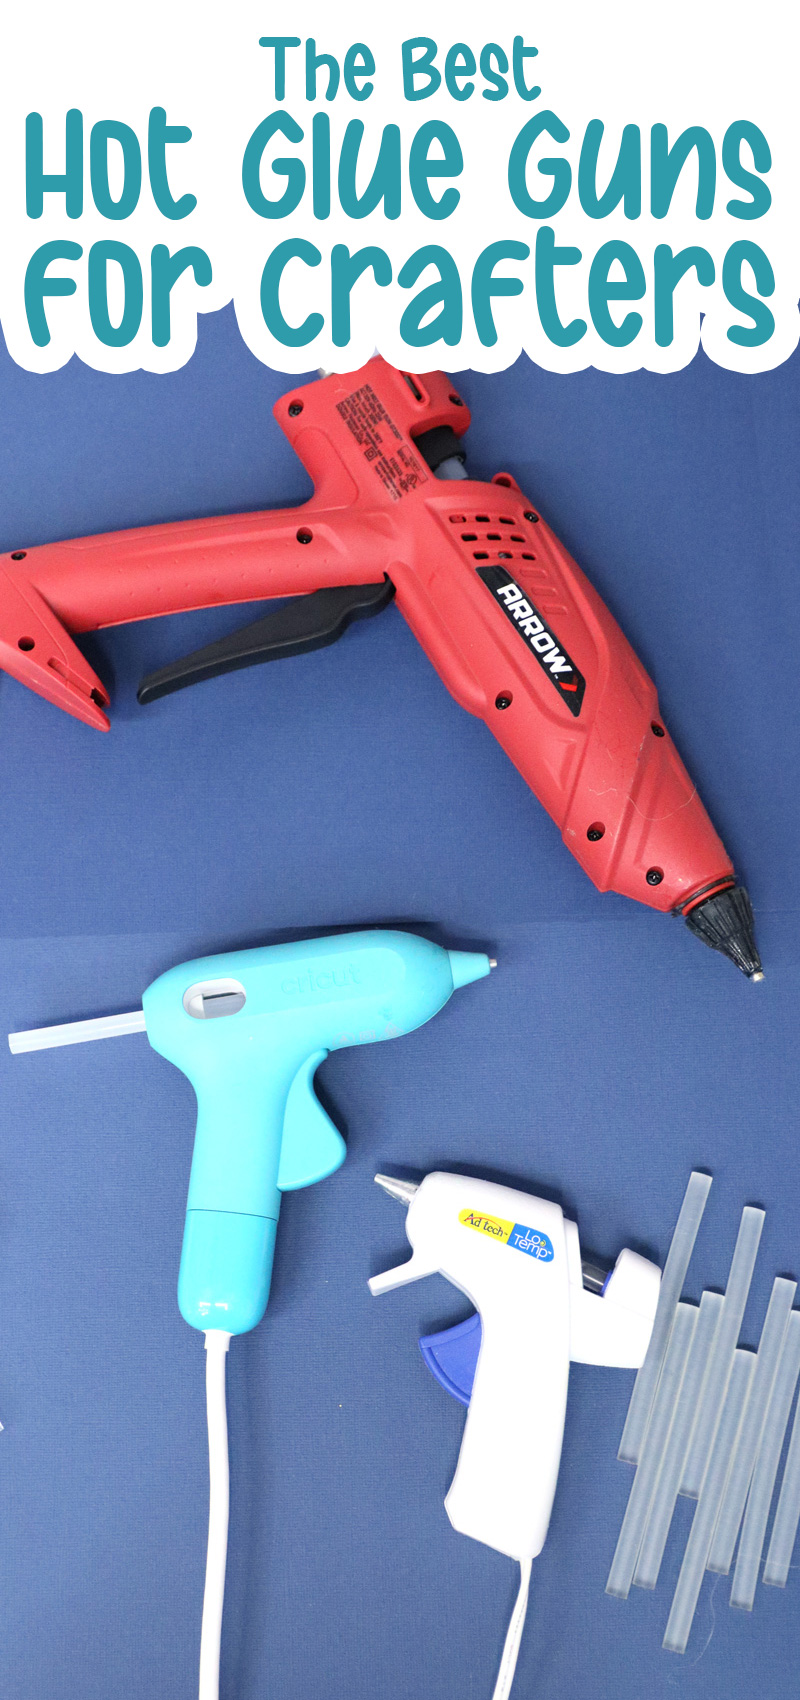 Best Heat Gun for Crafts [Top 5 for Your DIY Project]